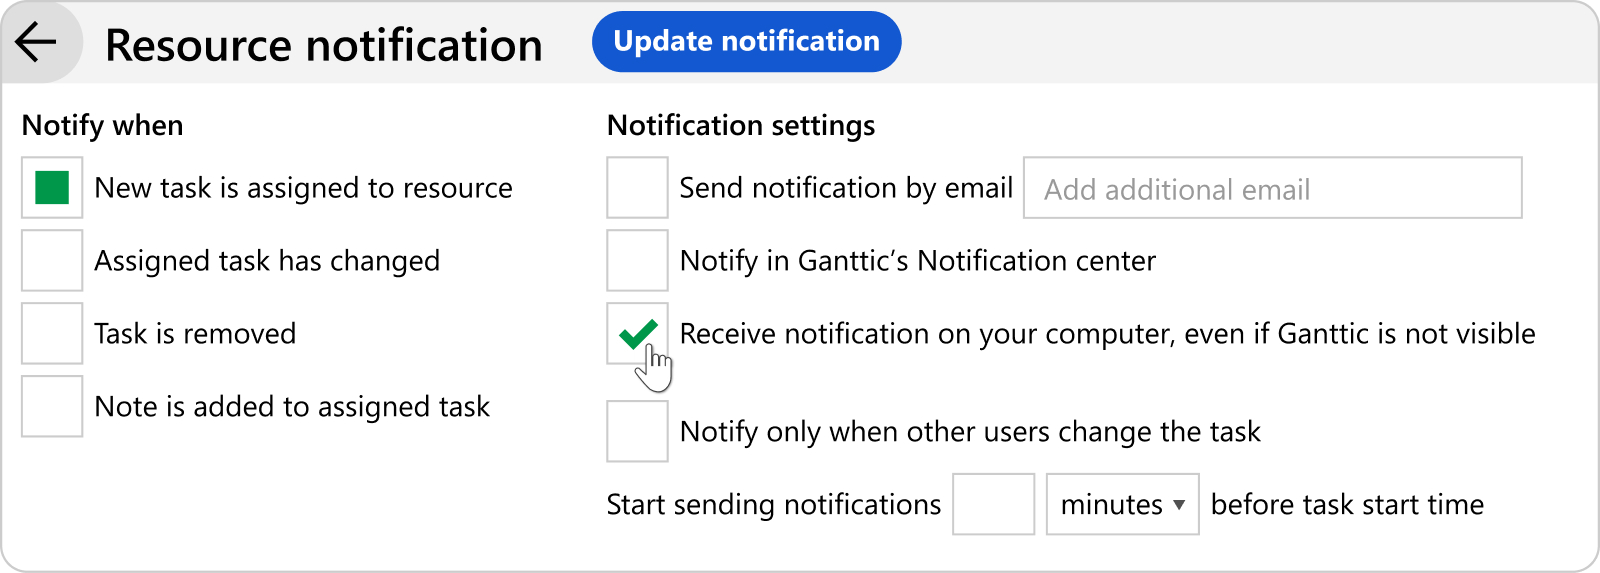 Ganttic's notifications keep everyone up to date with new tasks and activities. 